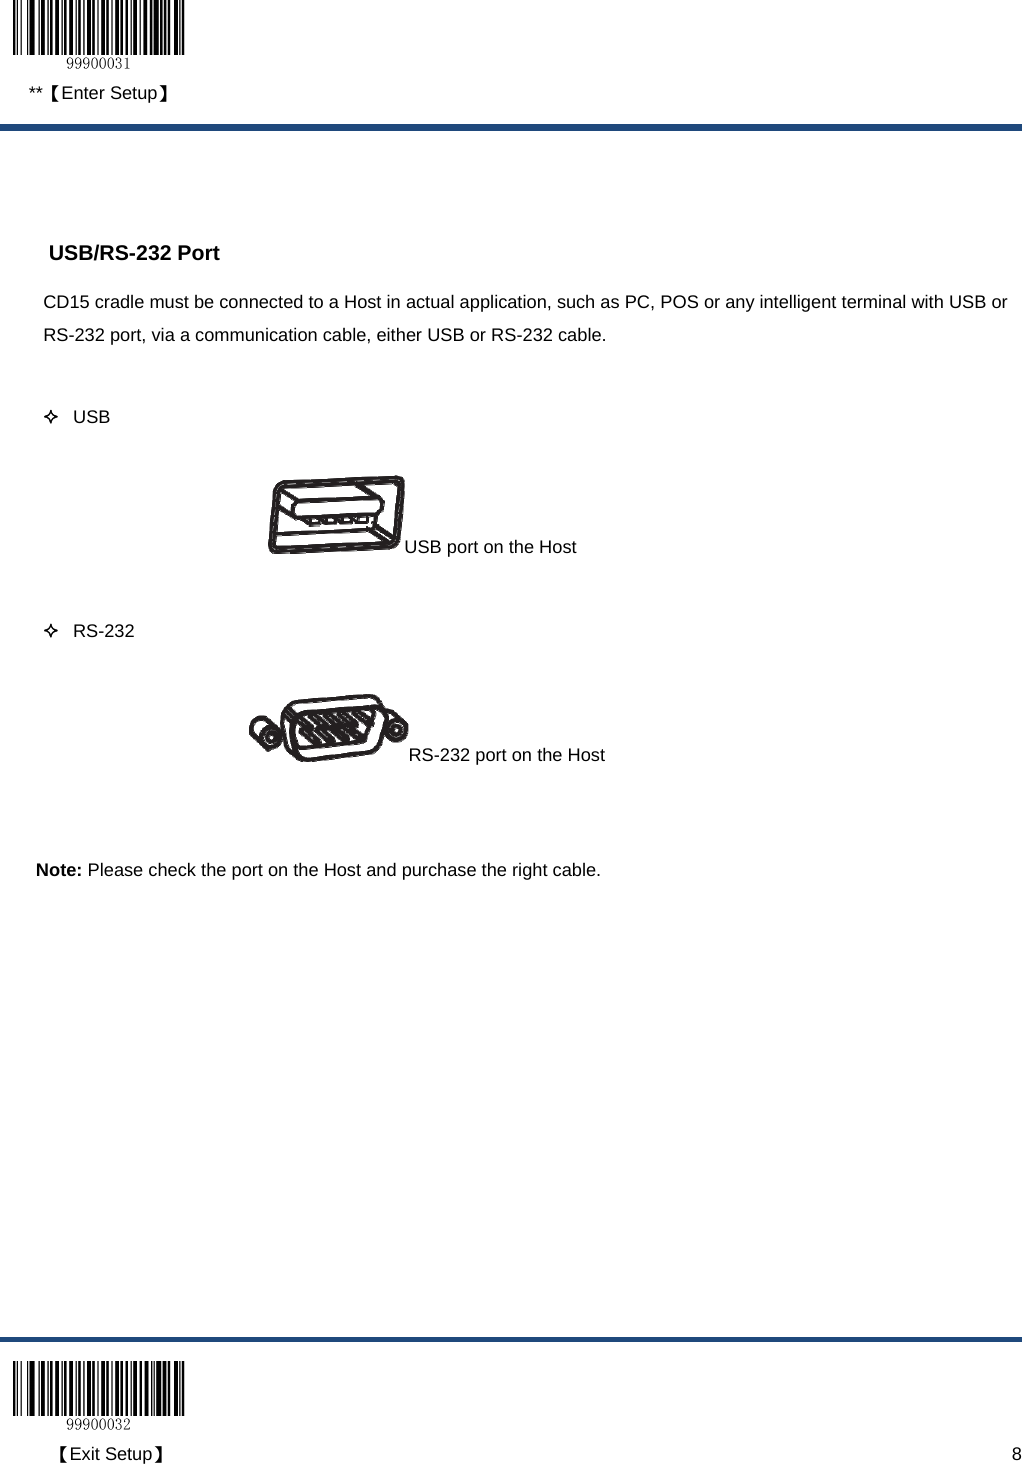  **【Enter Setup】  【Exit Setup】                                                                                                                                                                      8   USB/RS-232 Port CD15 cradle must be connected to a Host in actual application, such as PC, POS or any intelligent terminal with USB or RS-232 port, via a communication cable, either USB or RS-232 cable.    USB USB port on the Host   RS-232 RS-232 port on the Host  Note: Please check the port on the Host and purchase the right cable.  